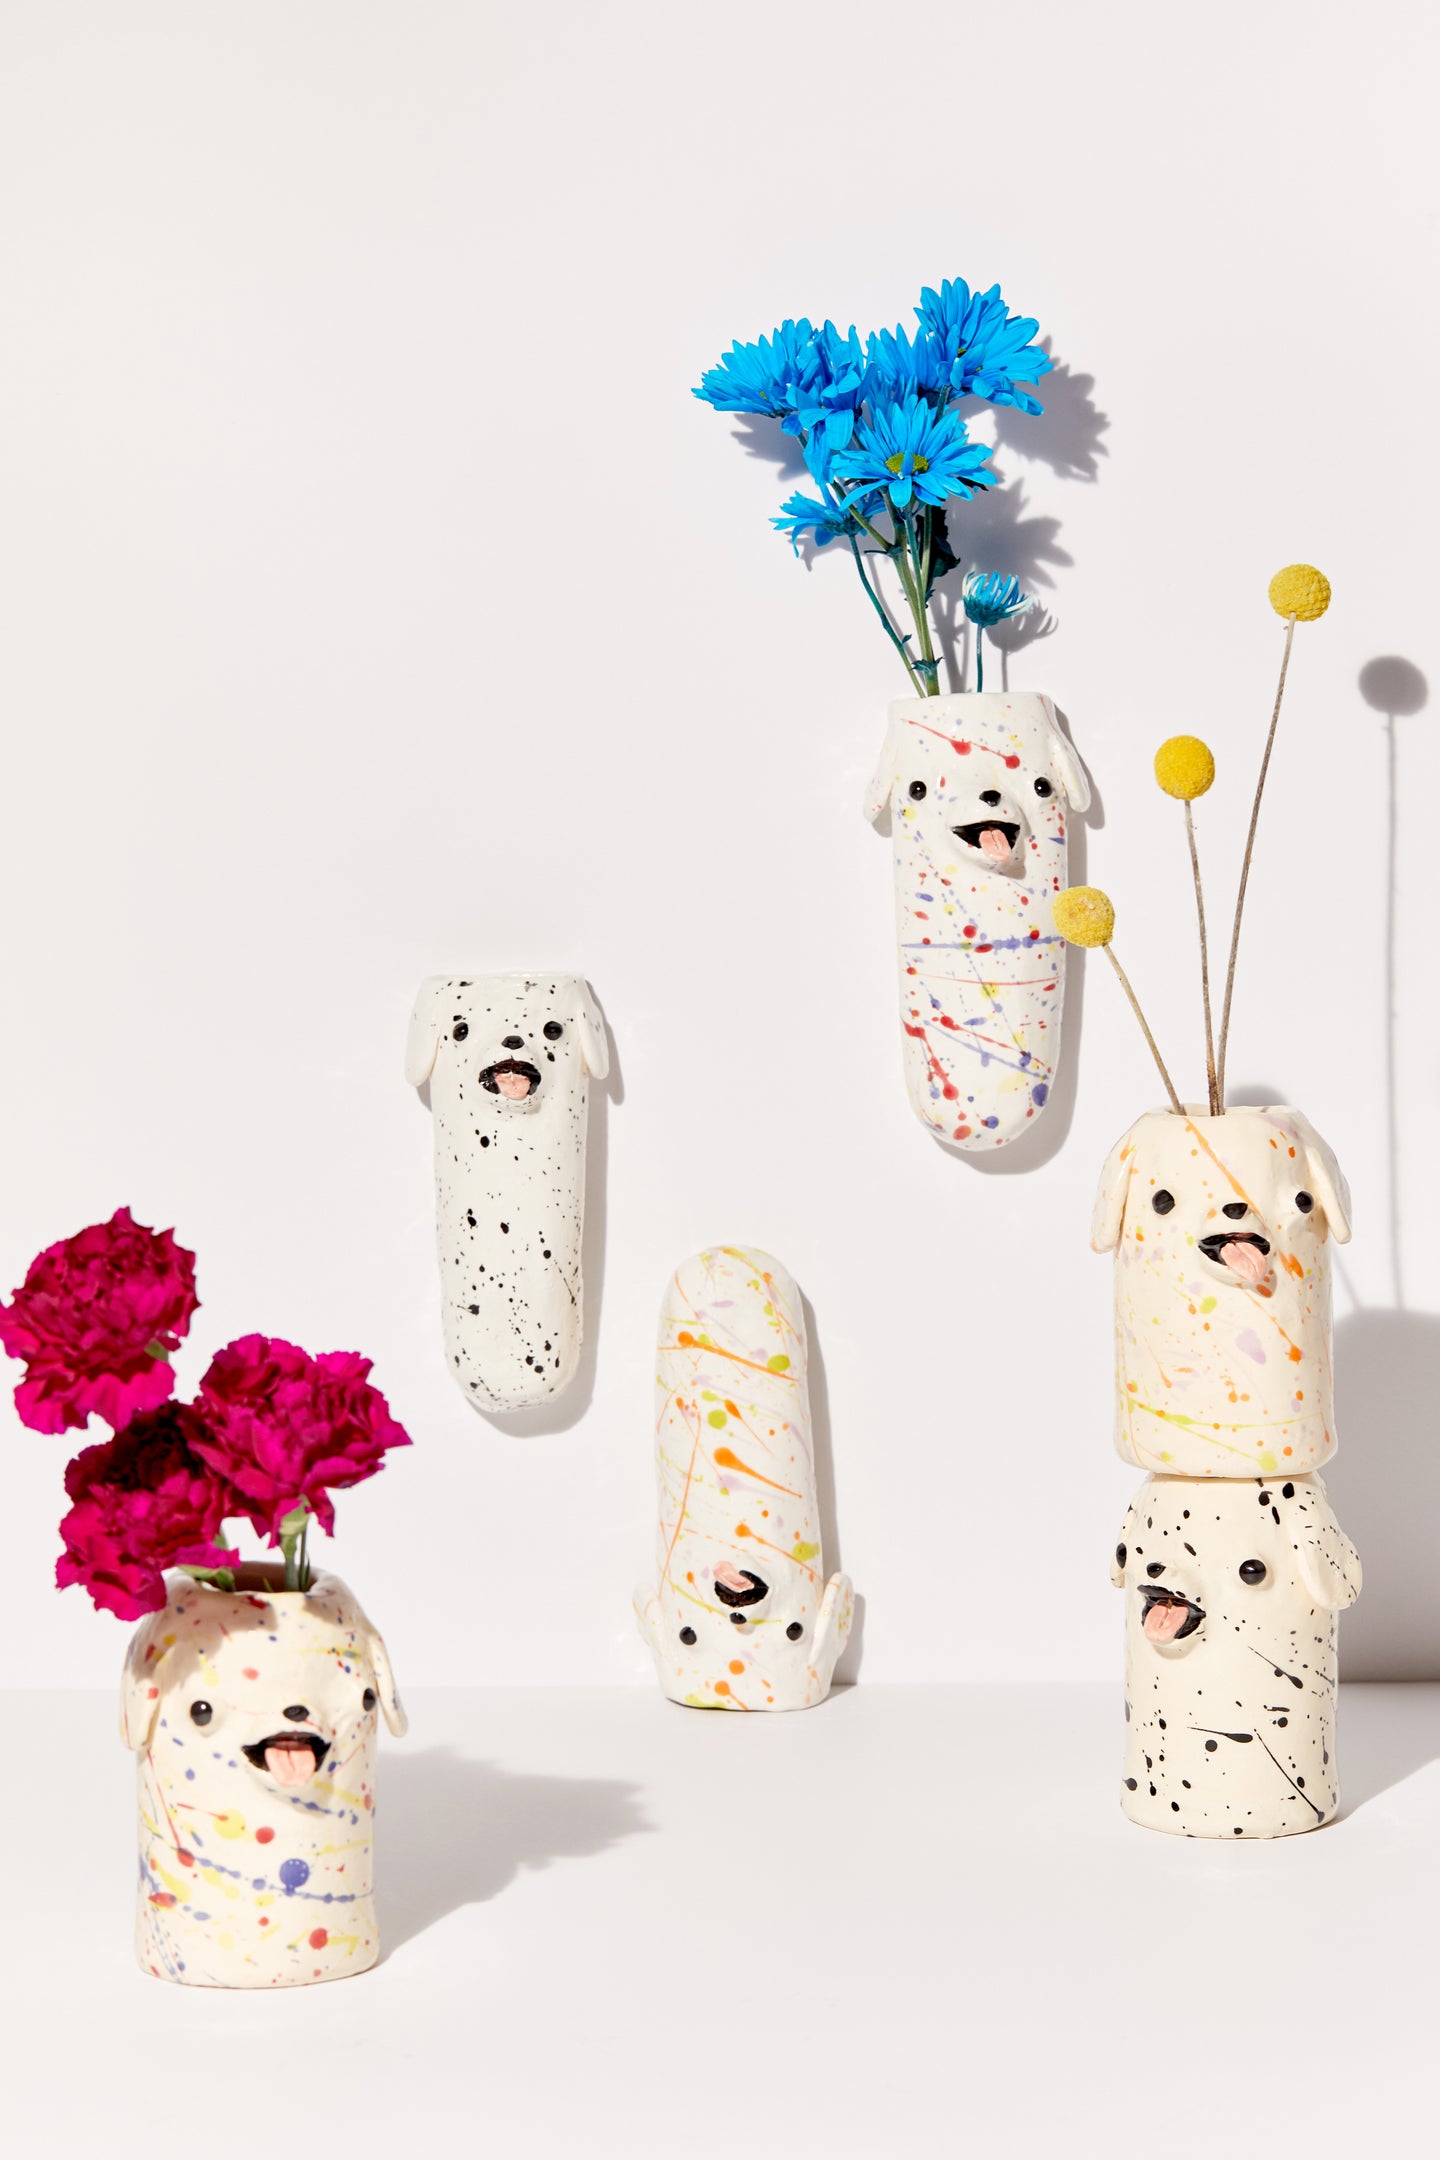 These Urban Outfitters Vases Sold Out in 2 Days Last Year—Now They’re Back